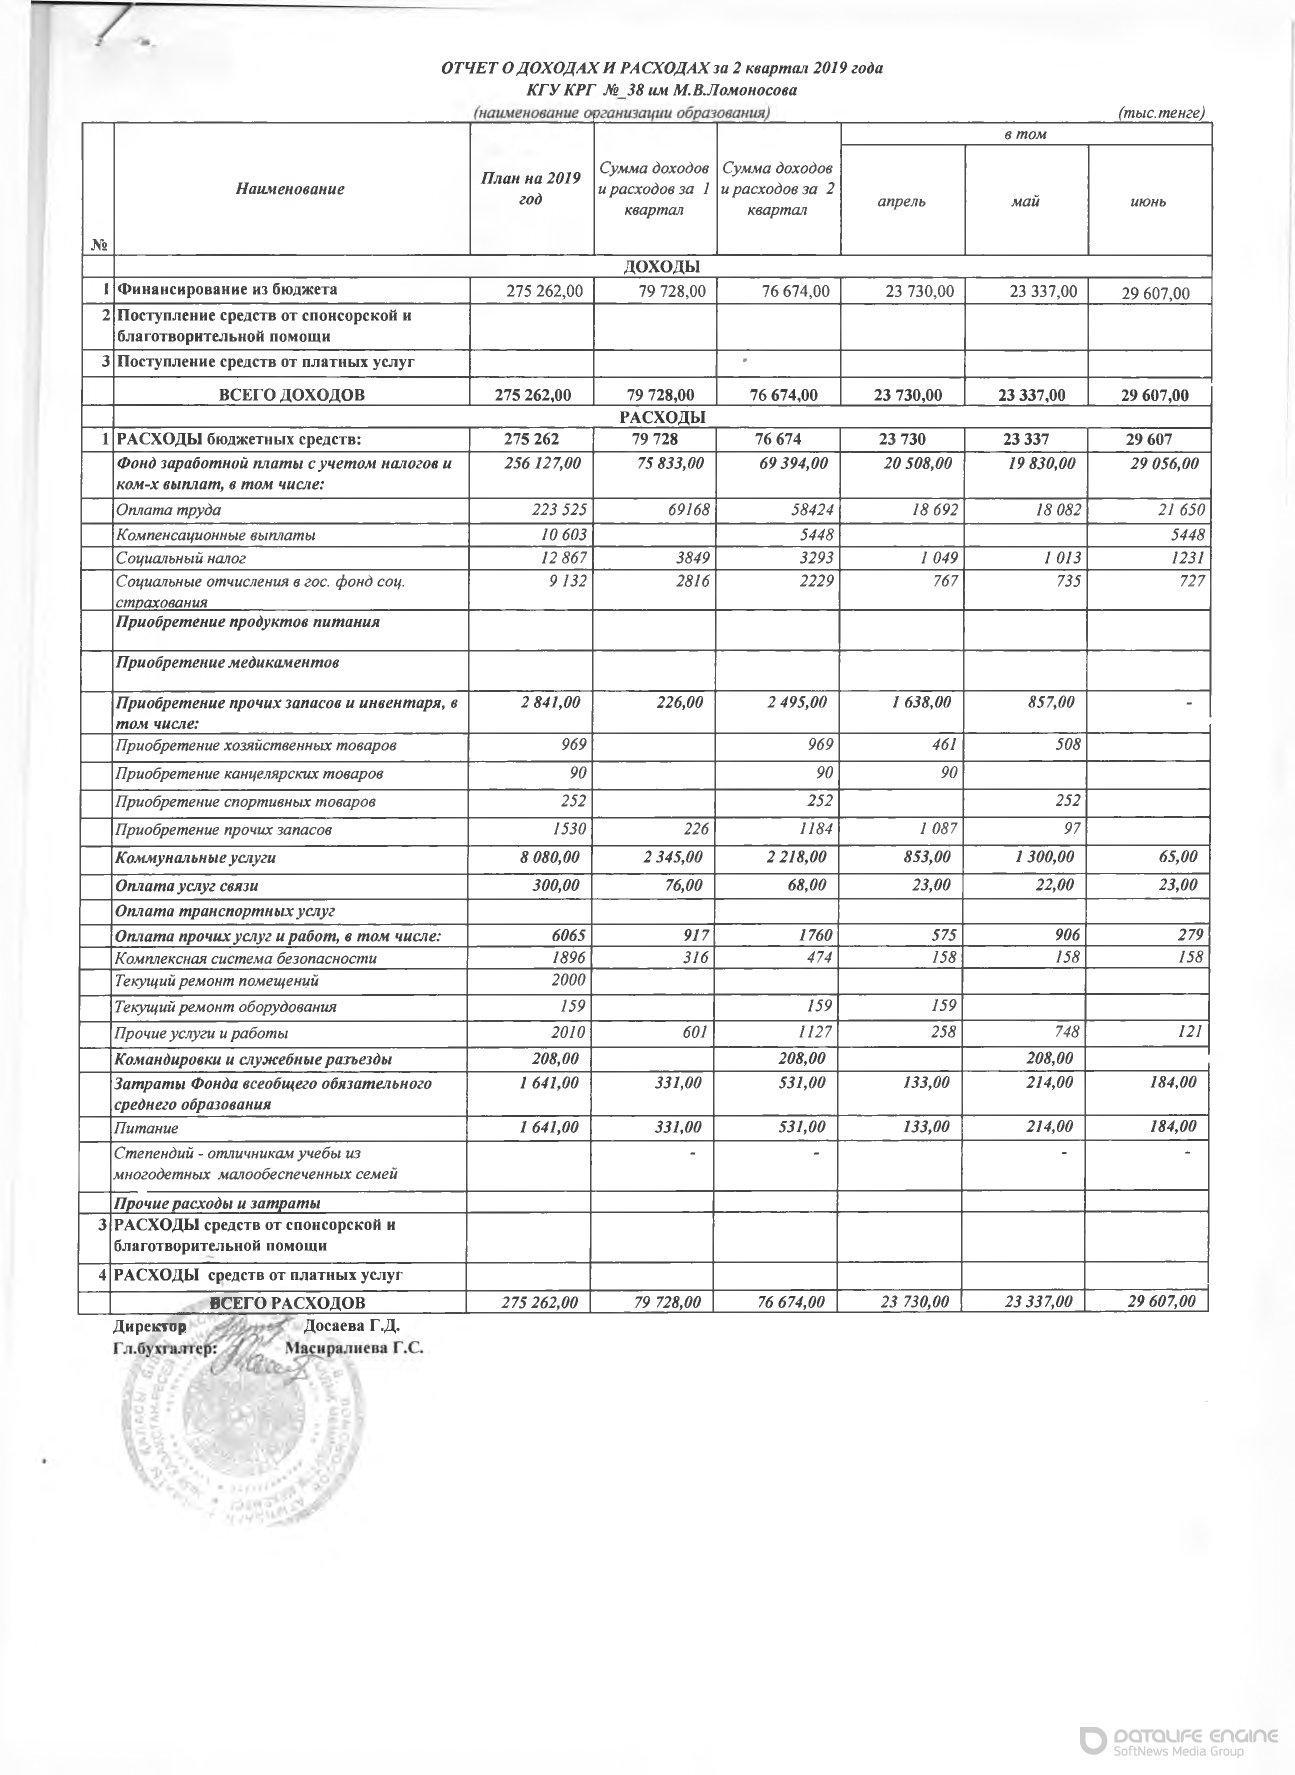 Statement of income and expenses за 2 квартал 2019